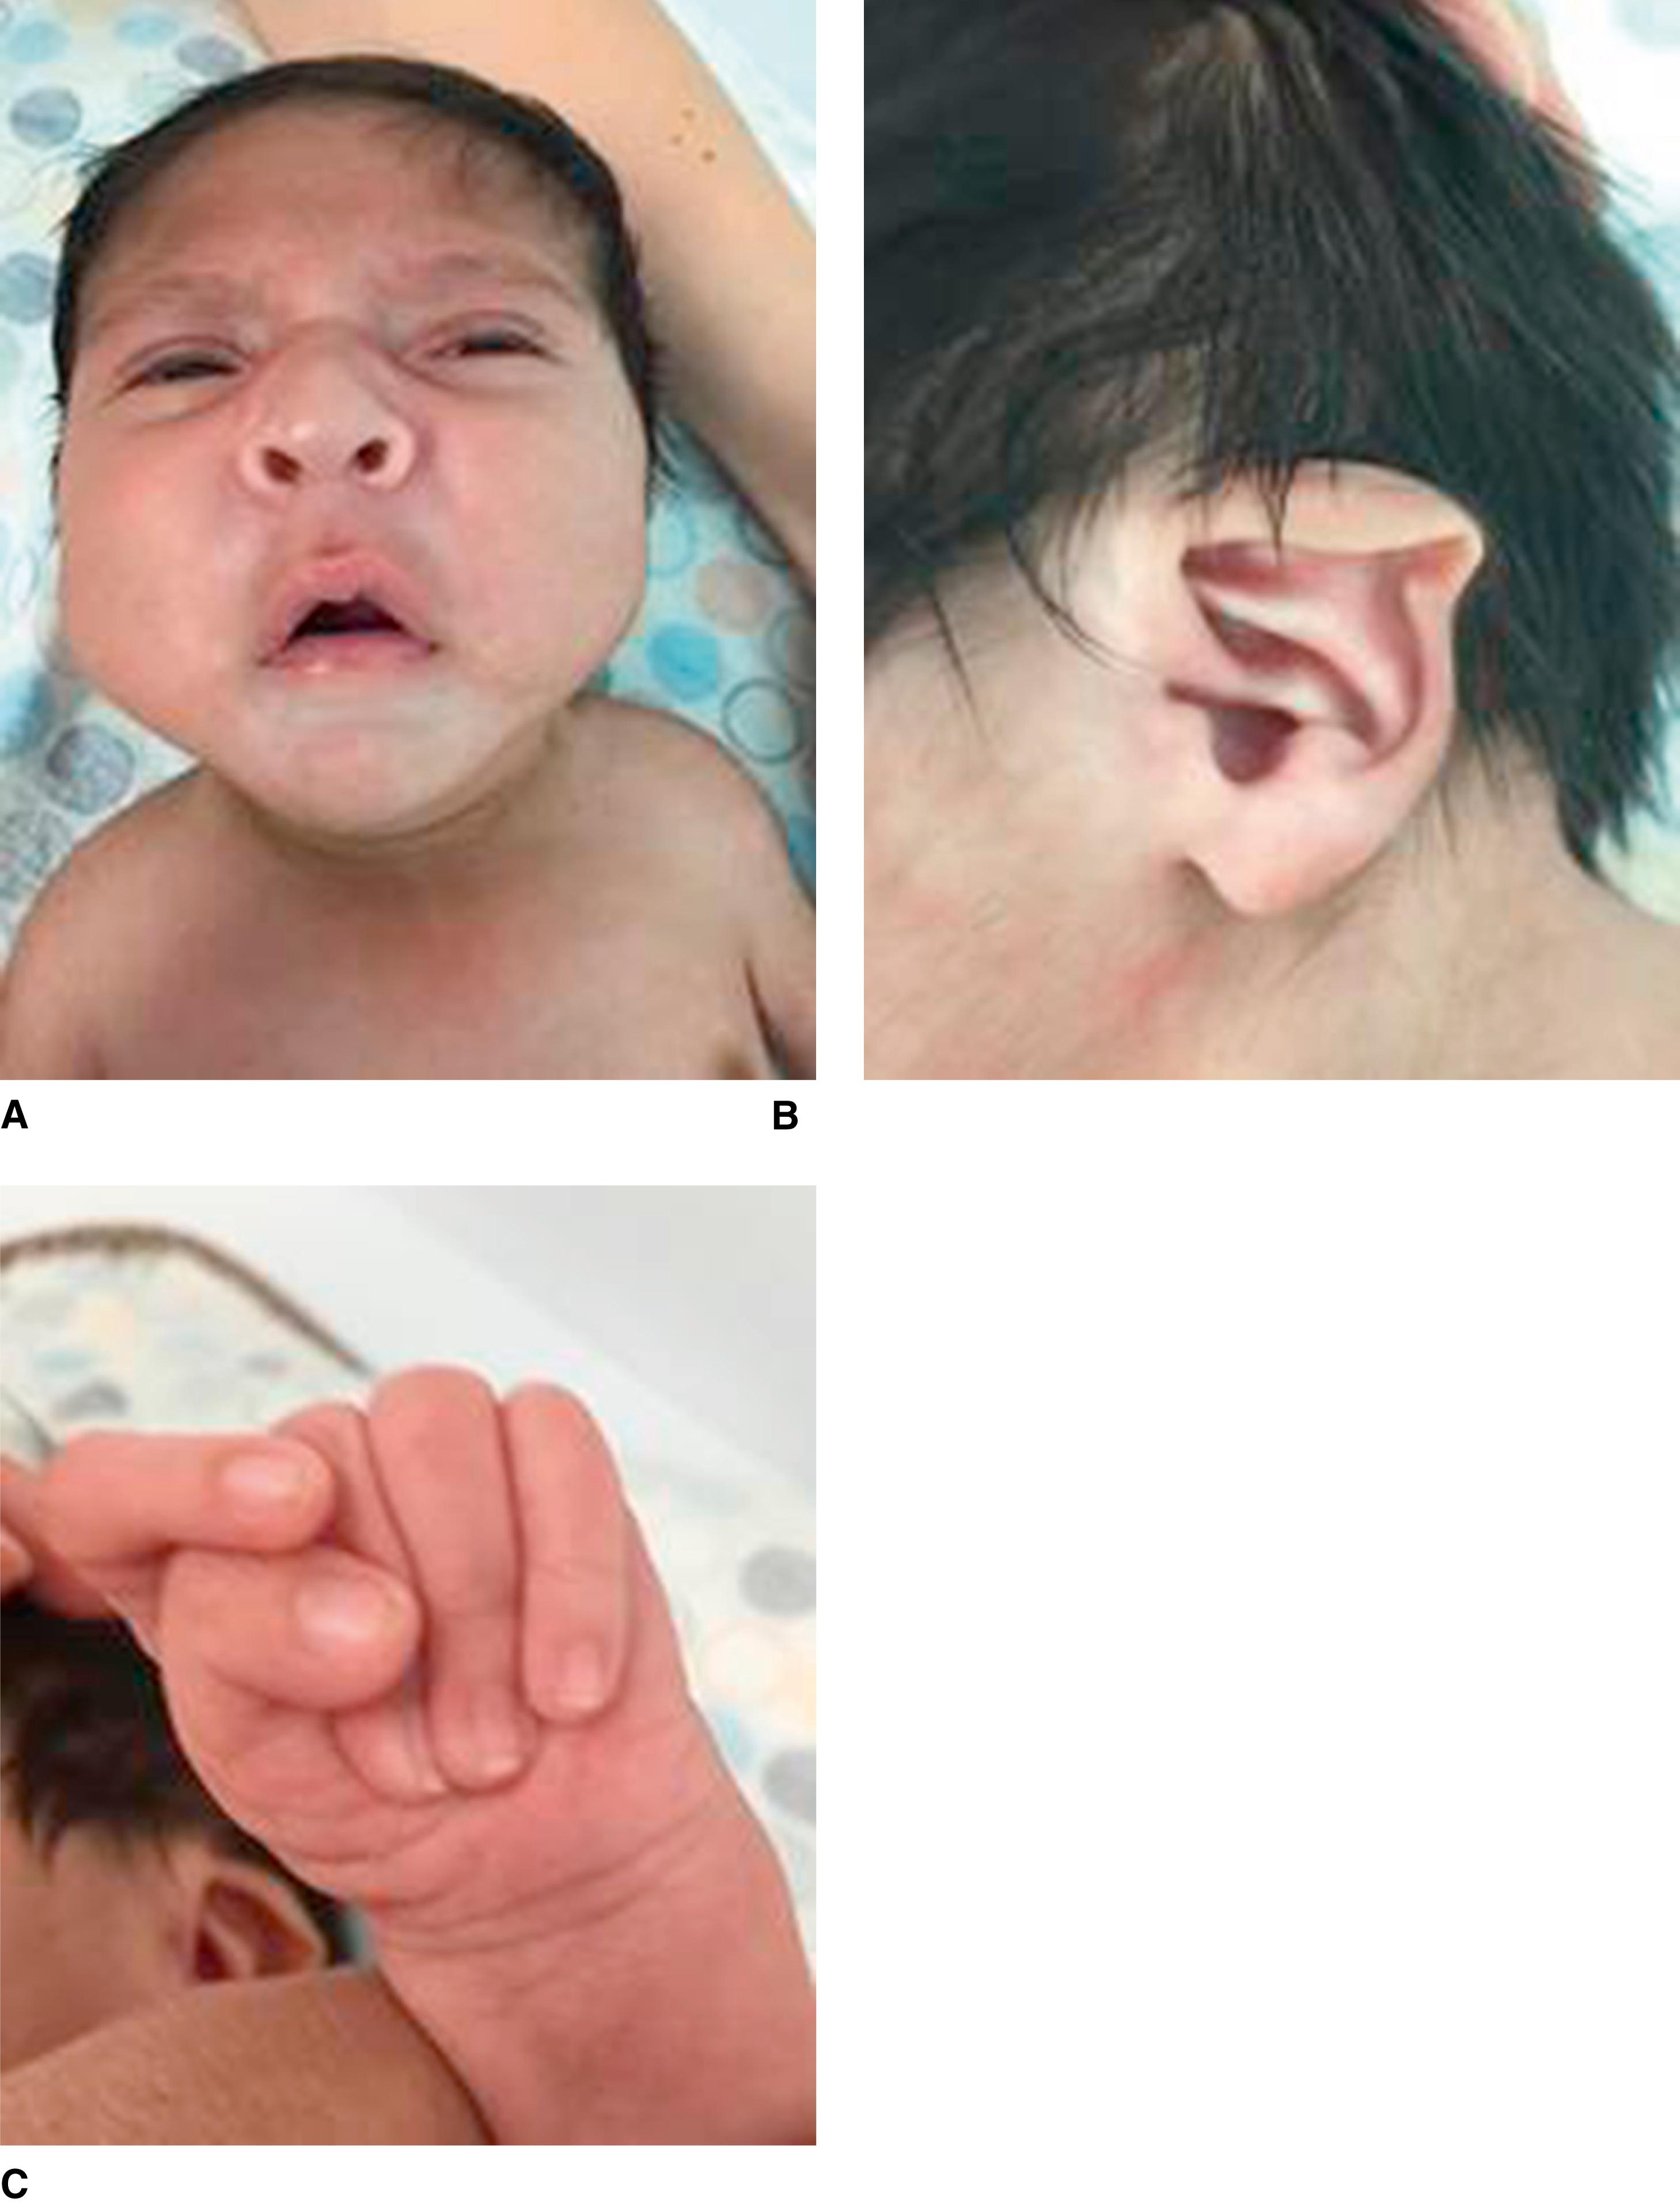 FIGURE 1, A 1-month-old boy with Beals contractural arachnodactyly syndrome showing narrow palate, retrognathia, typical “crumpled ear,” and long fingers with characteristic camptodactyly and with ulnar deviation of thumb and second fingers causing overlap.